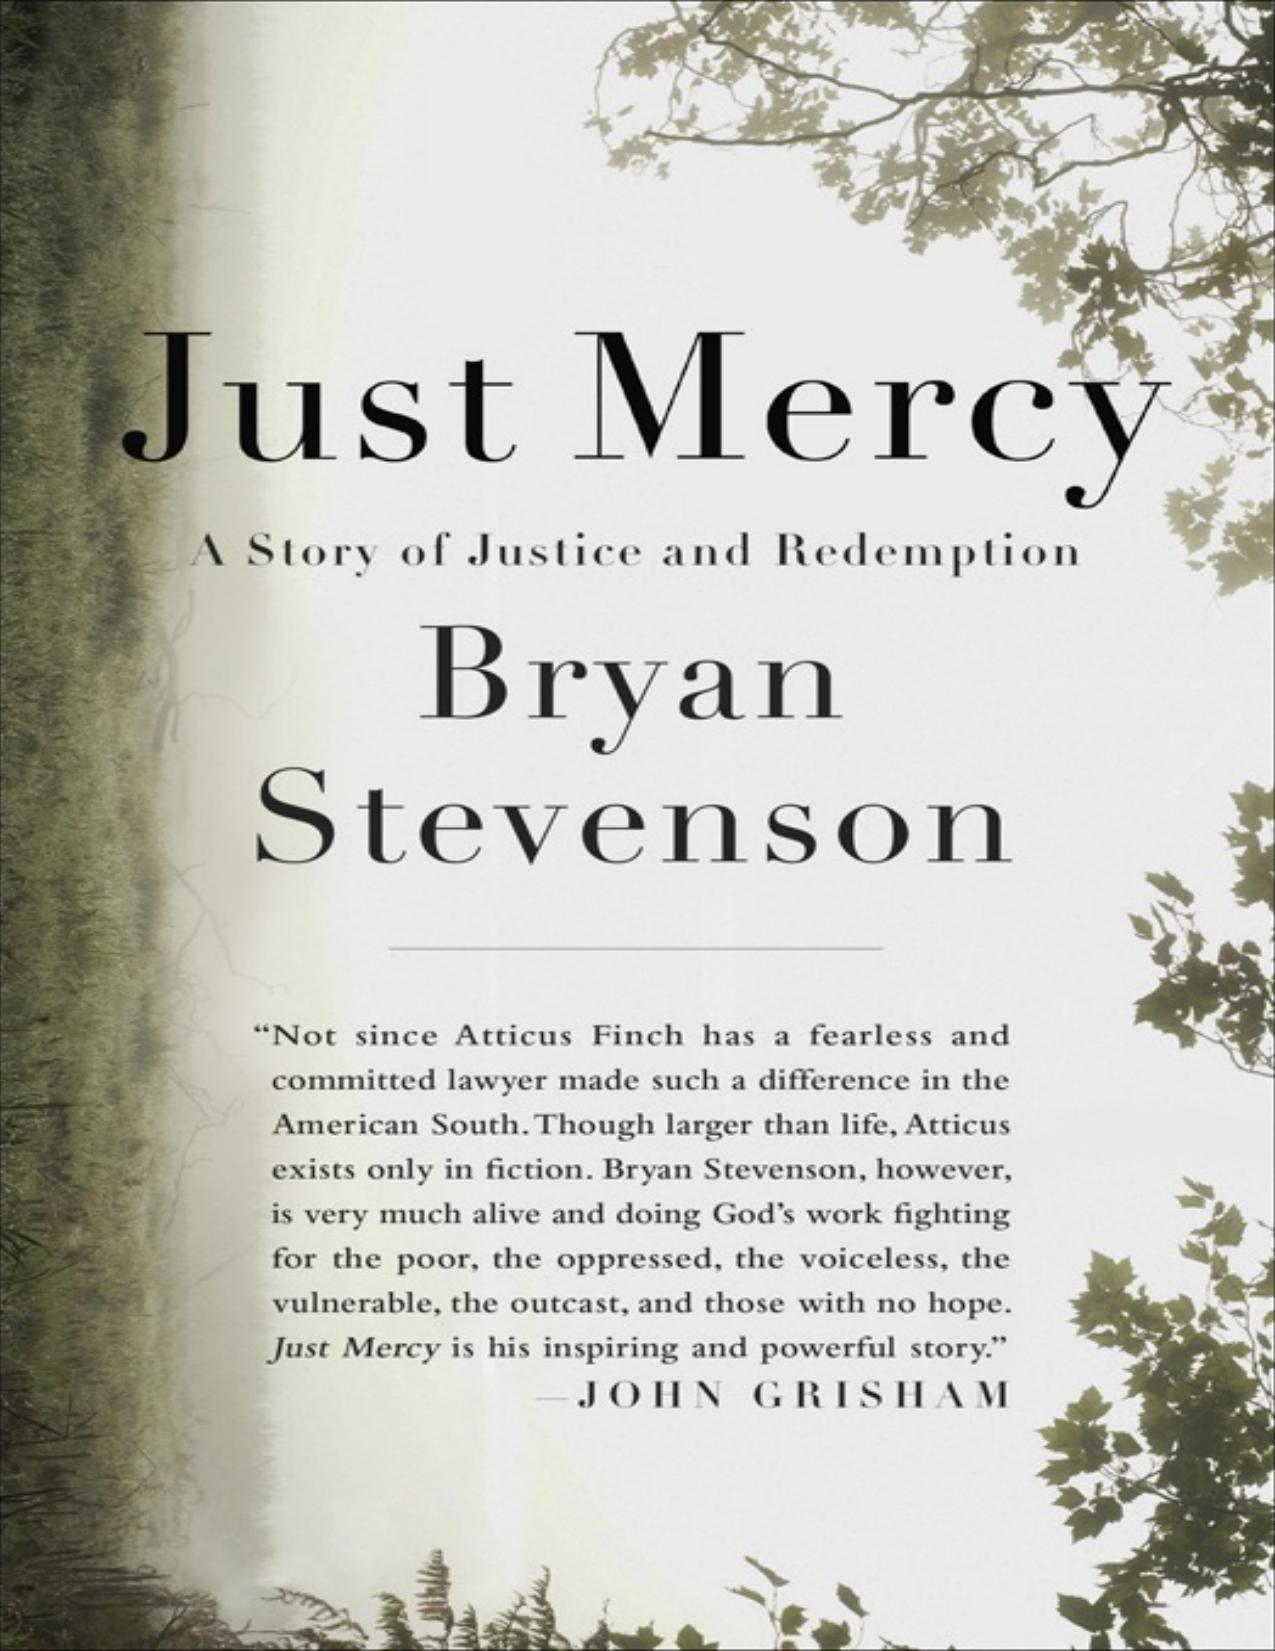 Just Mercy: A Story of Justice and Redemption - PDFDrive.com